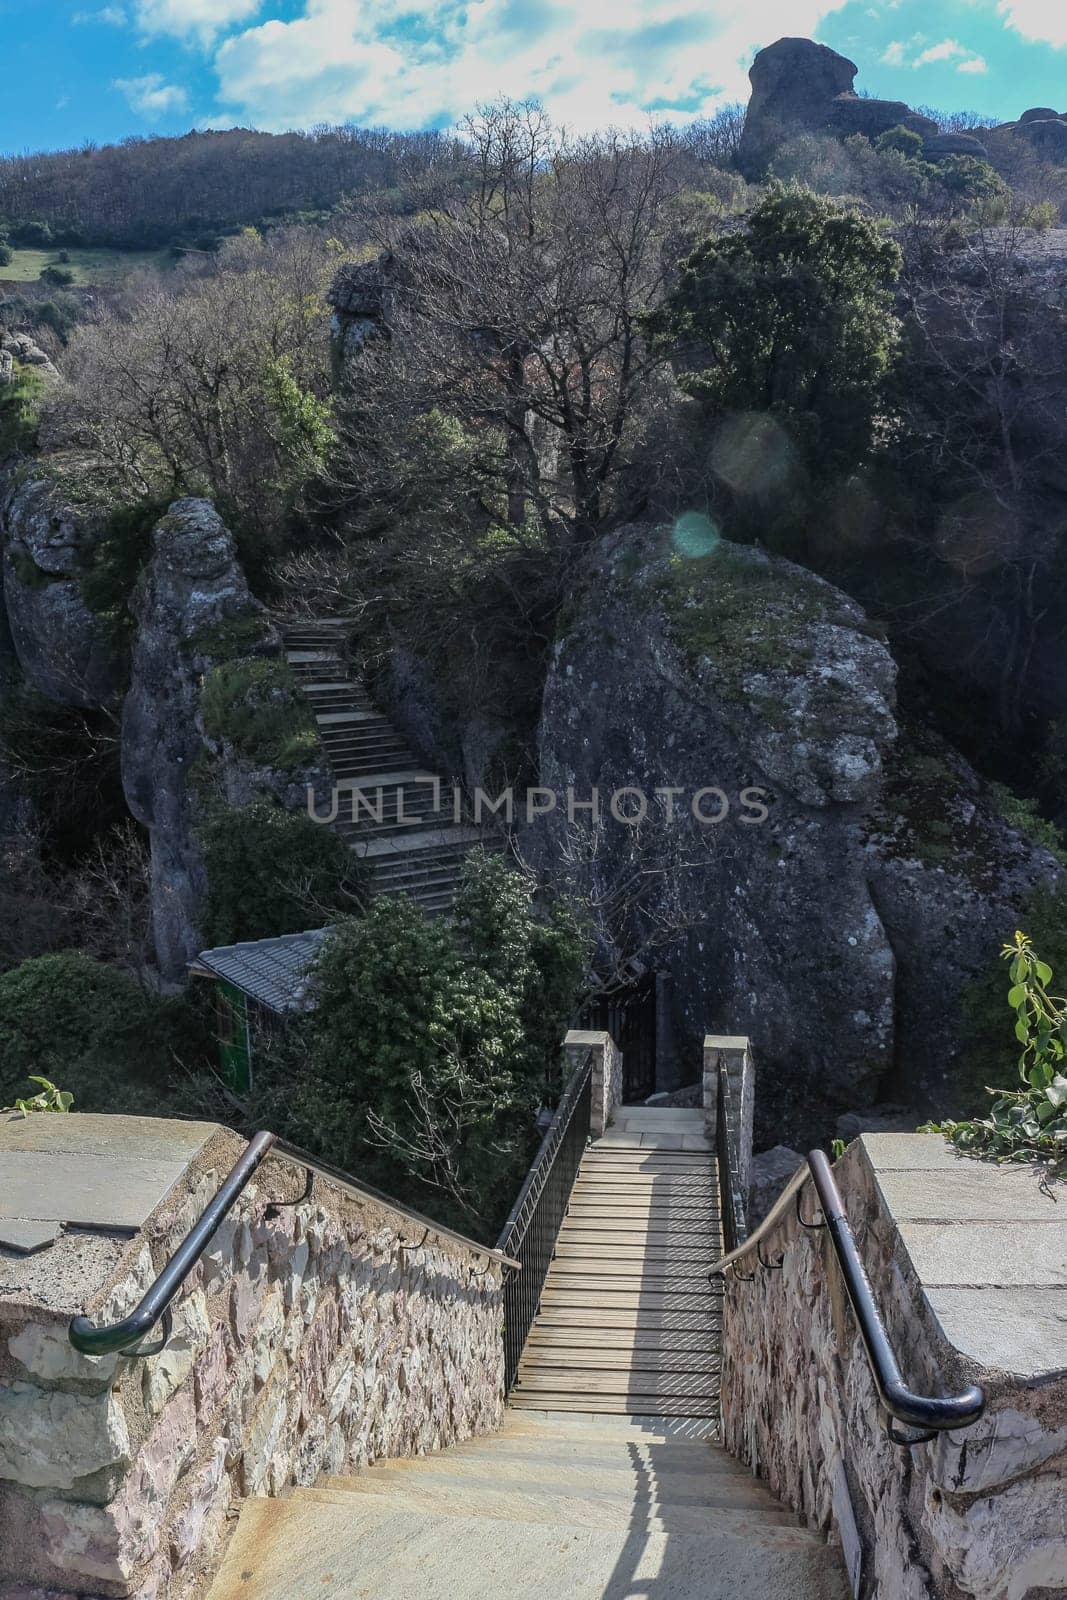 Enchanted Ascent: Stairway Amidst the Natural Splendor of Meteora's Churches in Greece by DakotaBOldeman